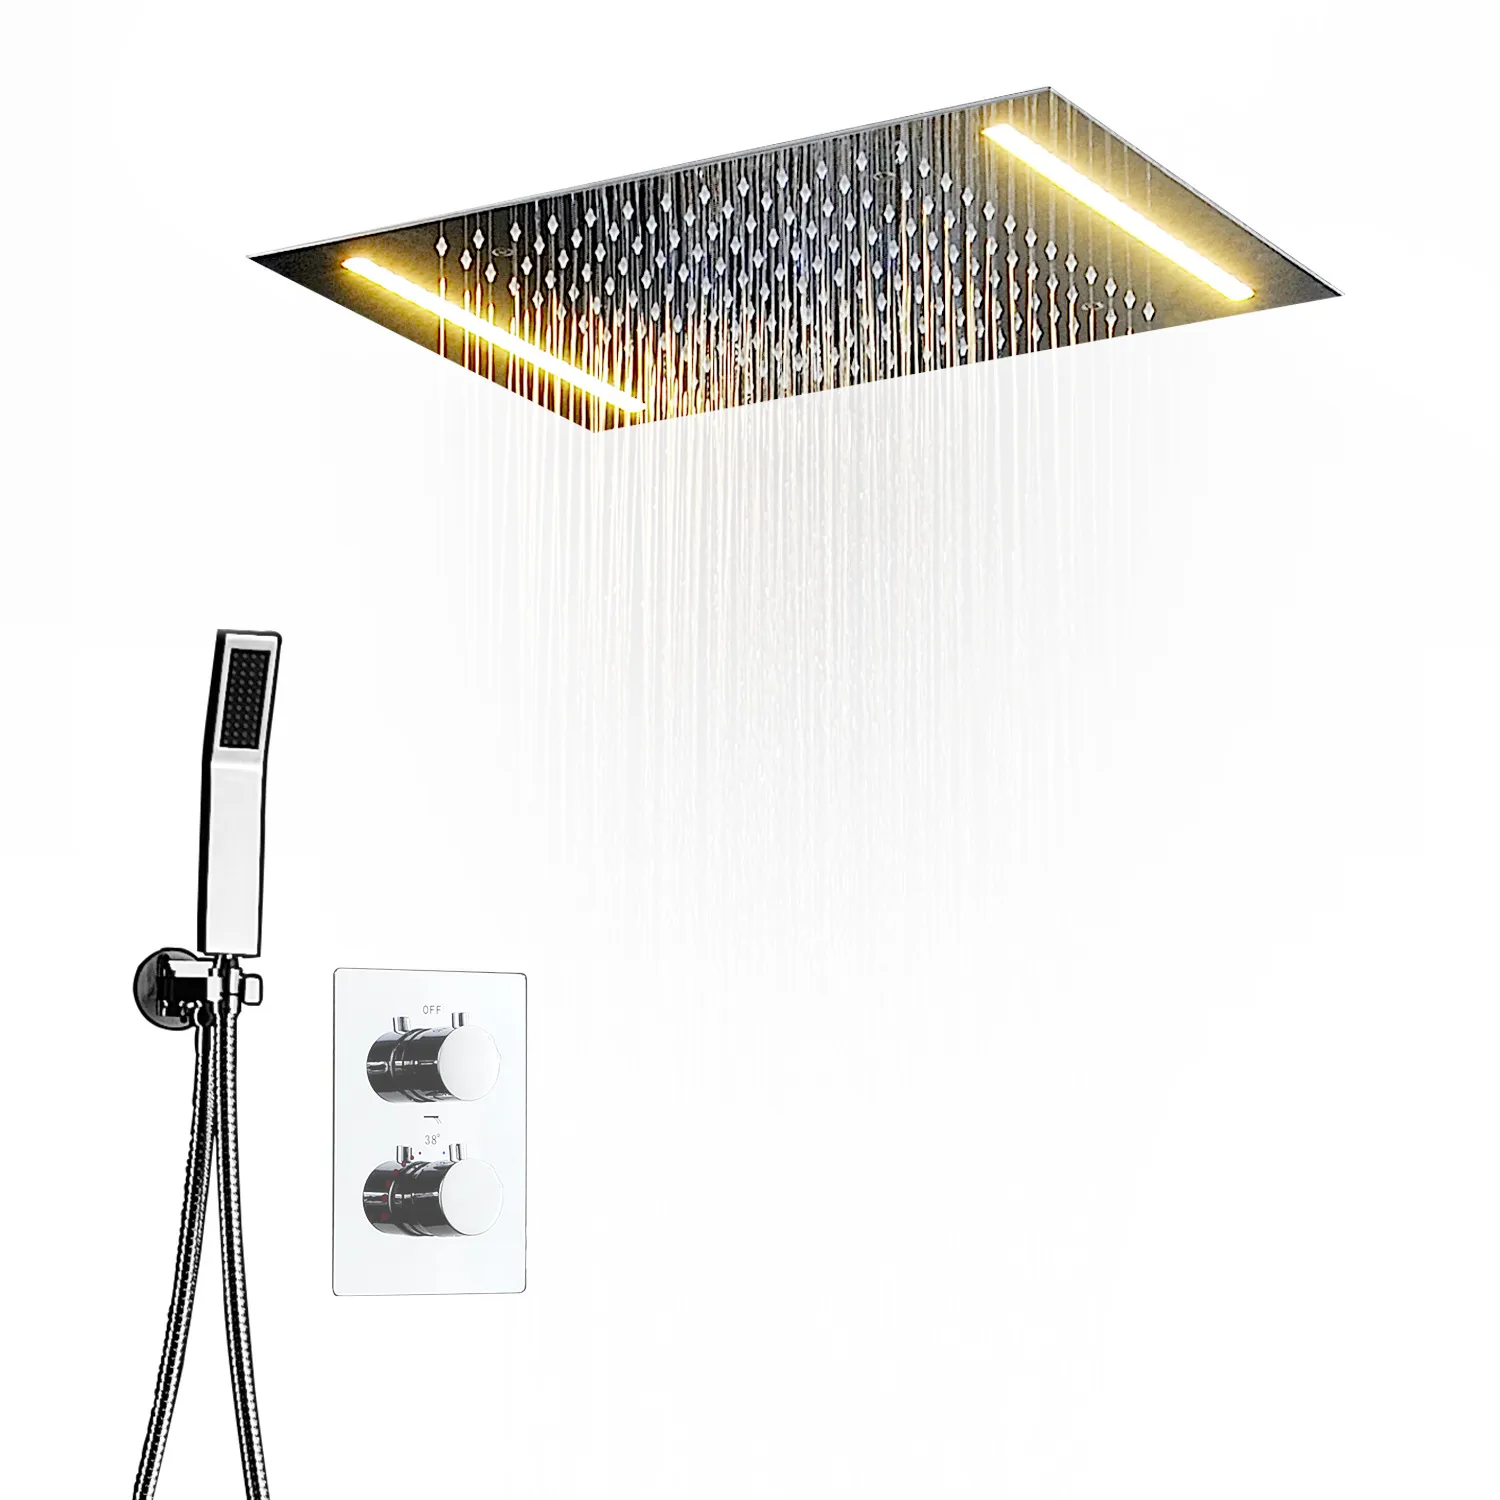 LED Multi-functional Lights Bathroom Shower Set Accessories Faucet Panel Tap and cold water Mixer LED Ceiling Head Rainfall Wa187w